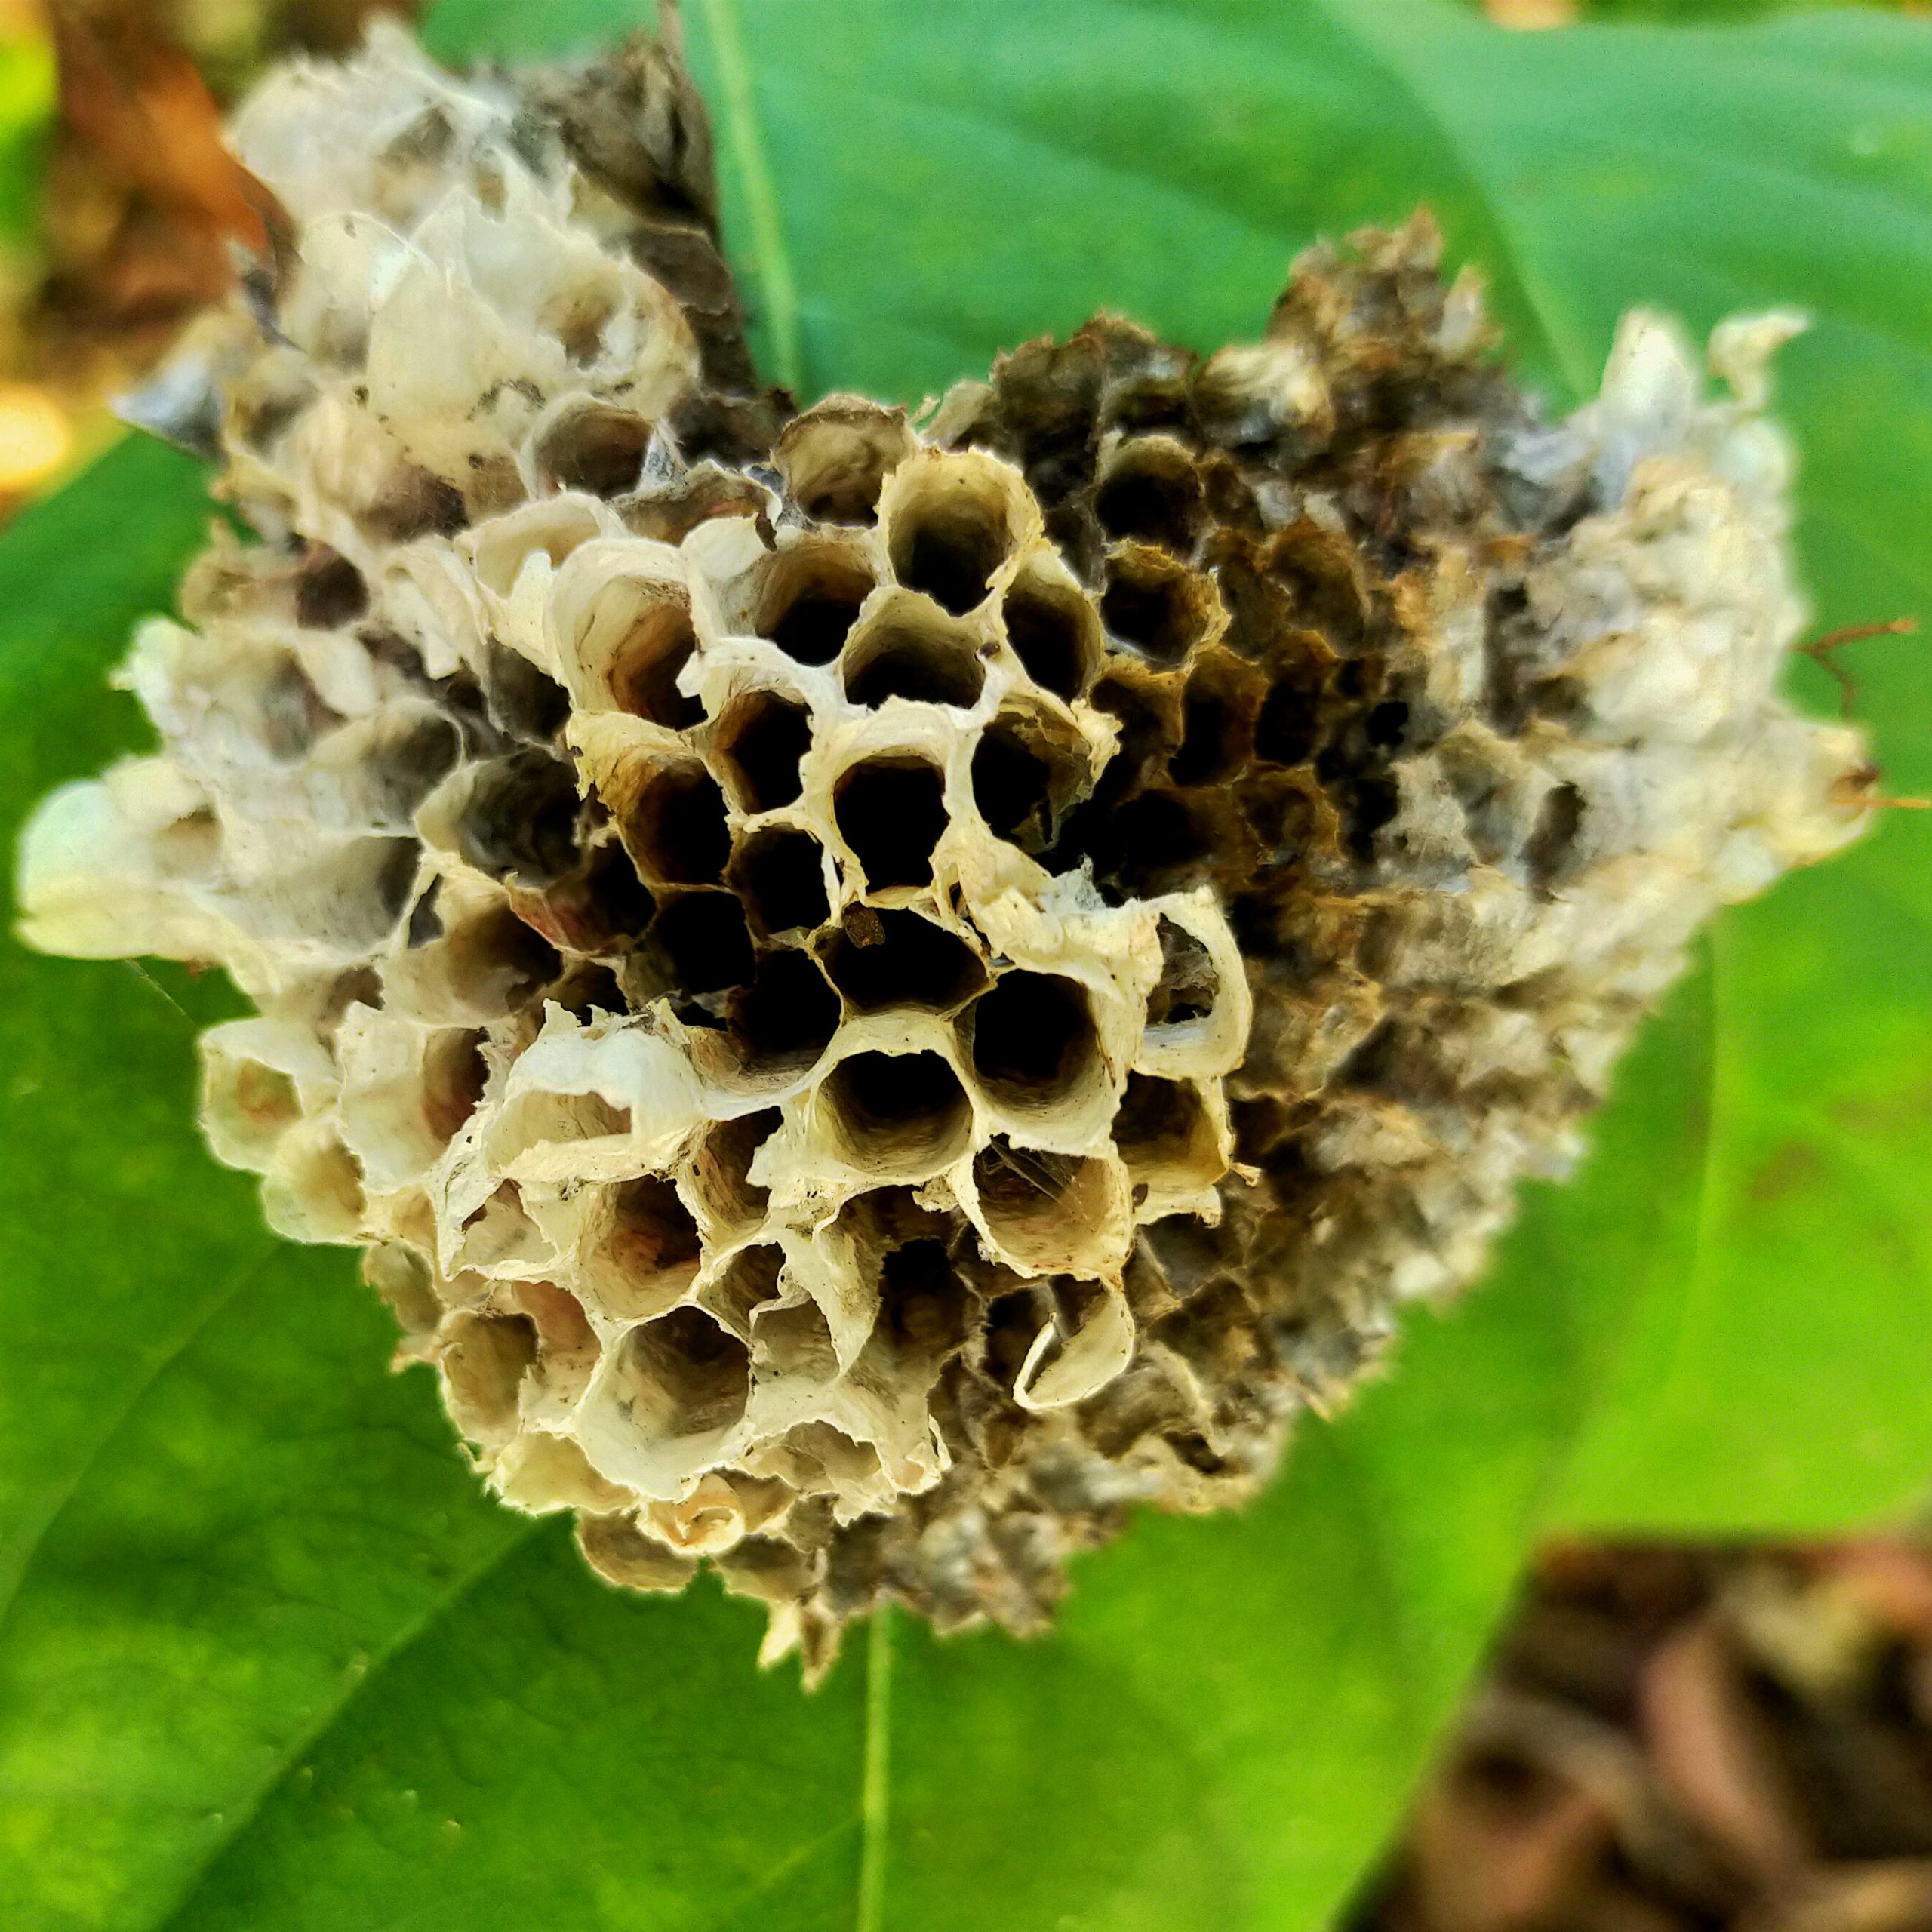 A nest of wasps